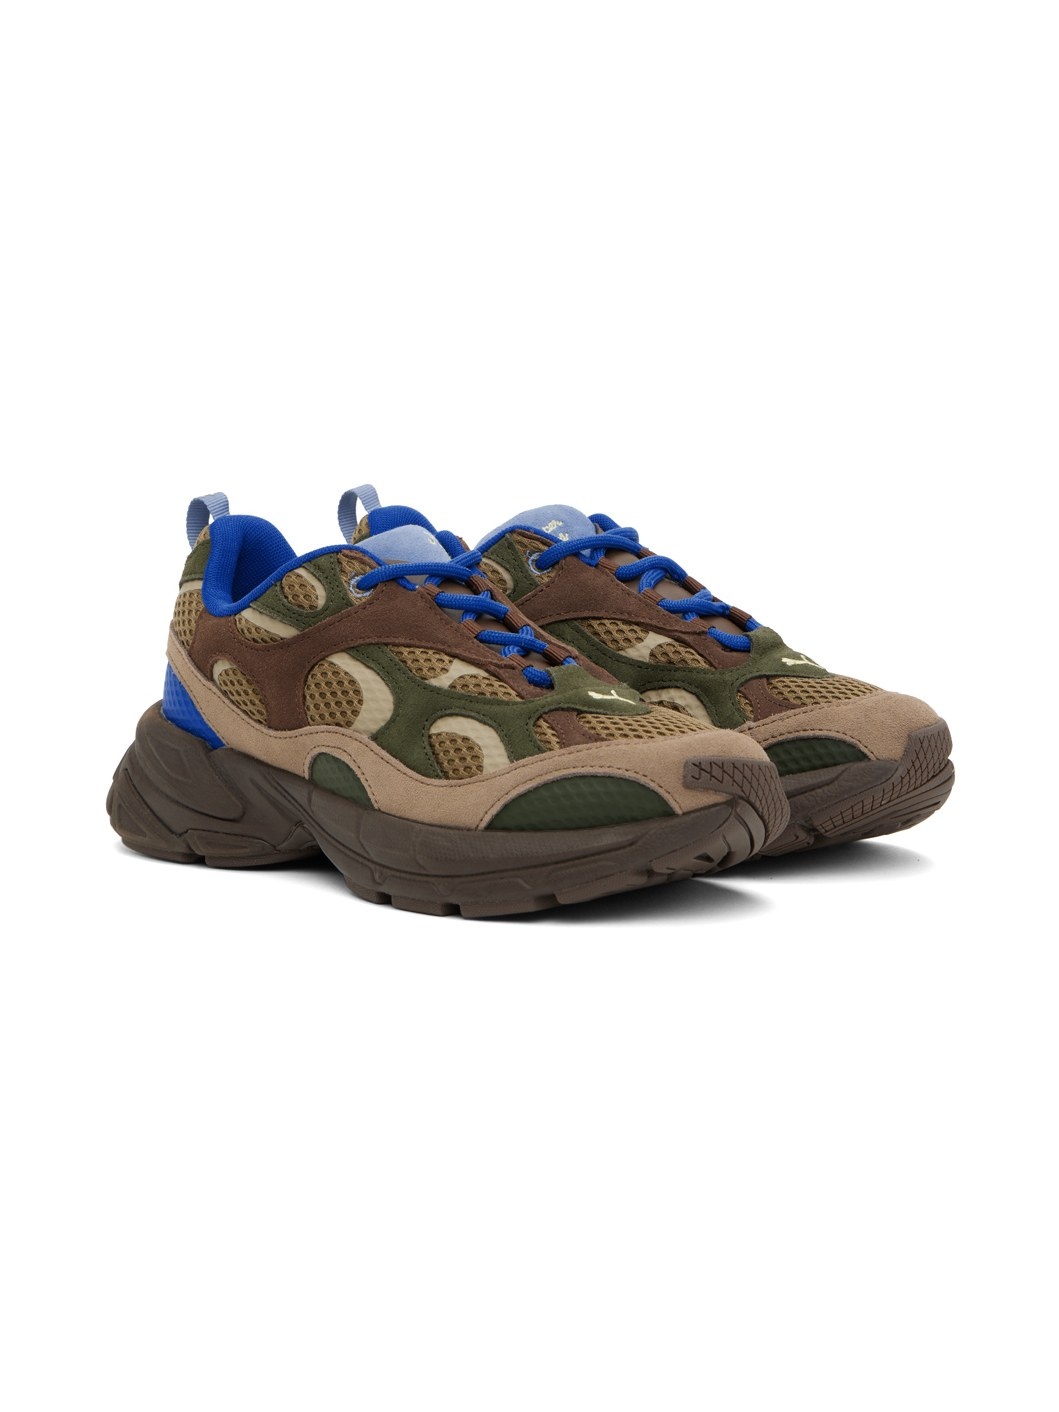 Brown & Blue Puma Edition Velophasis Sneakers - 4